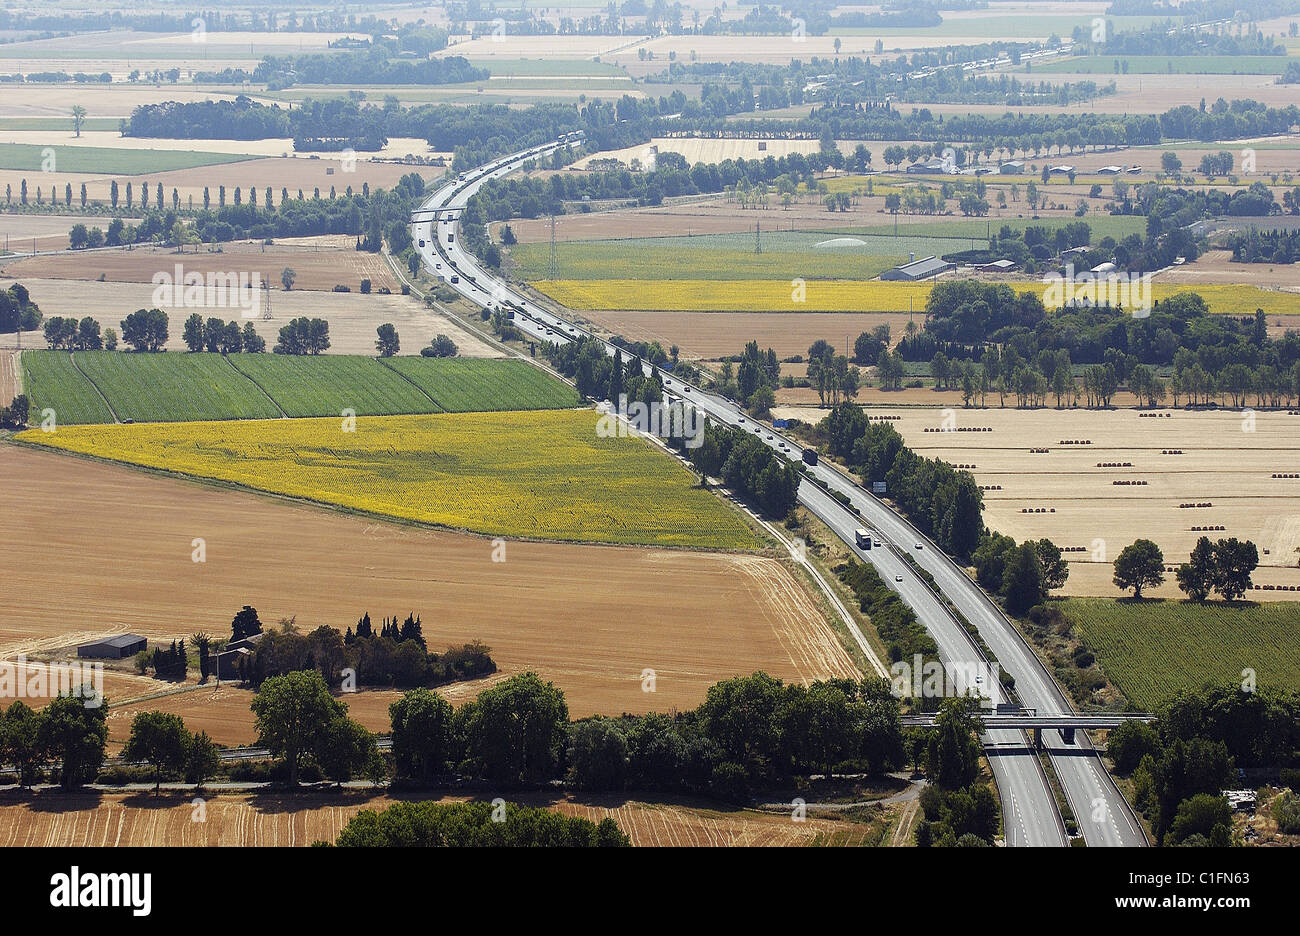 France, Aude, (aerial view) of the A61 motorway Stock Photo